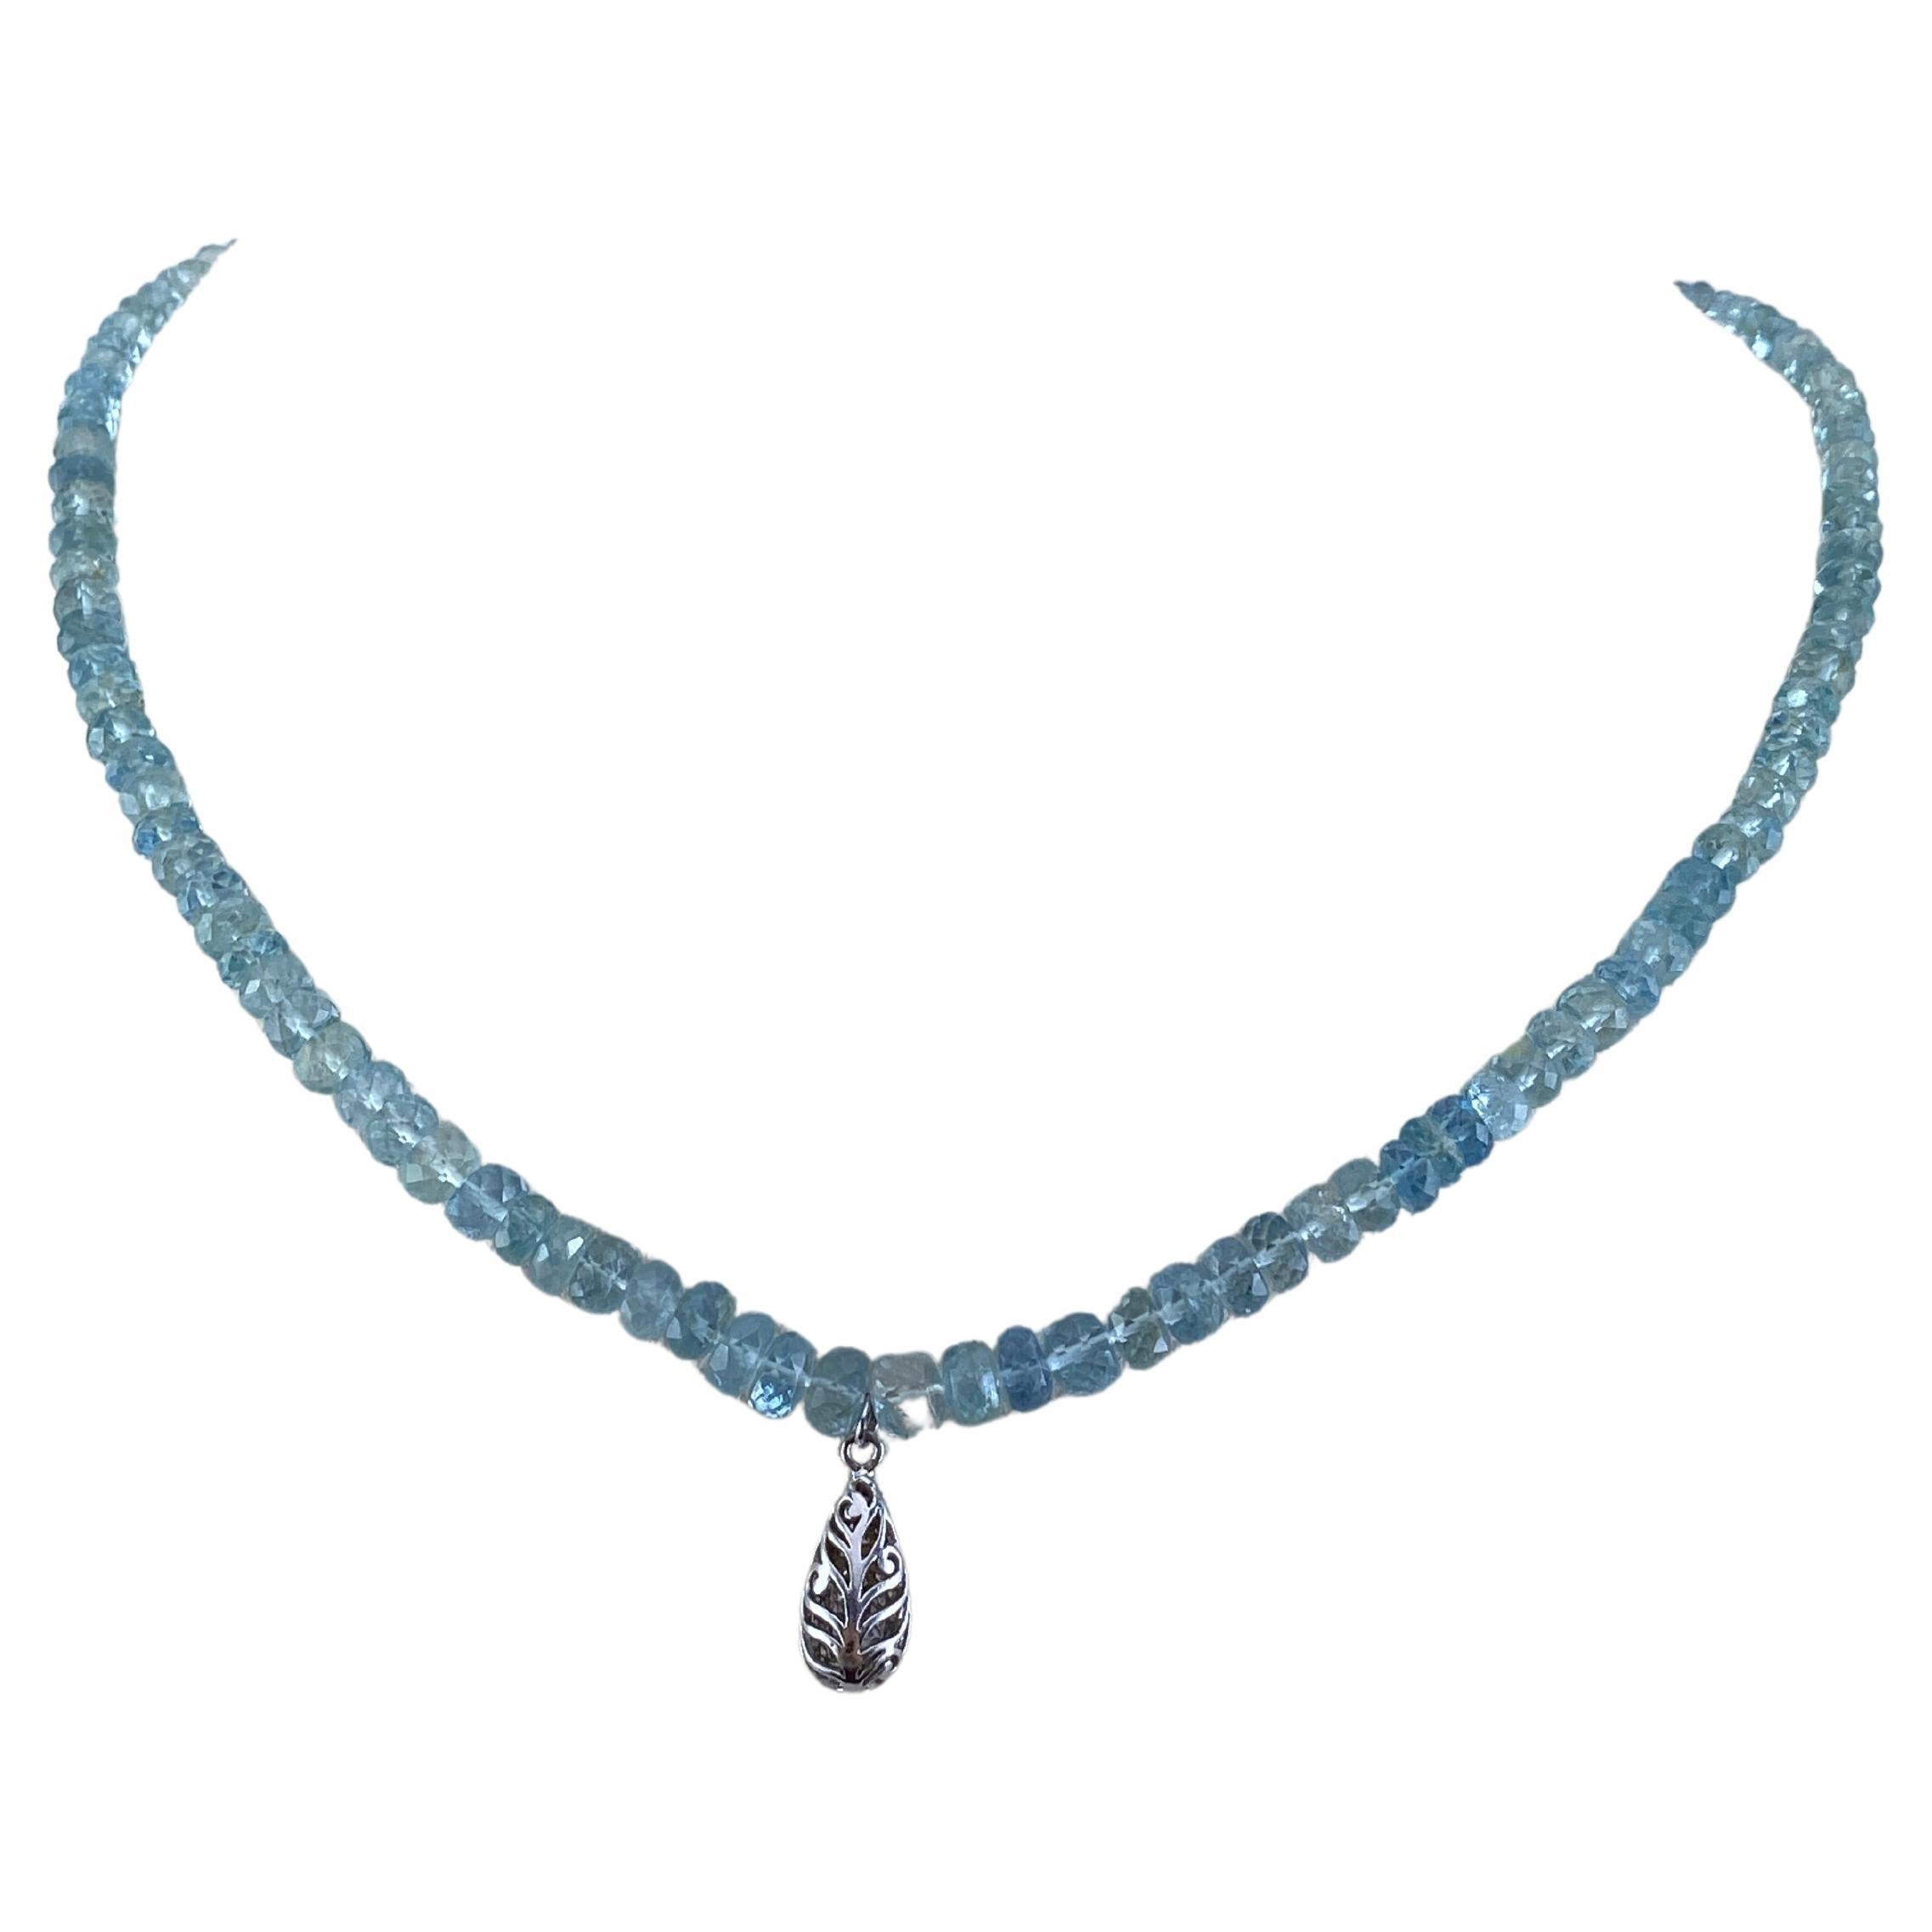 An elegant chain of 44.77 carat Aquamarine beads, with a 18K Gold and Diamond pendant. The chain is 16 inches in length, but can be altered. 
Please feel free to message us for more information. 